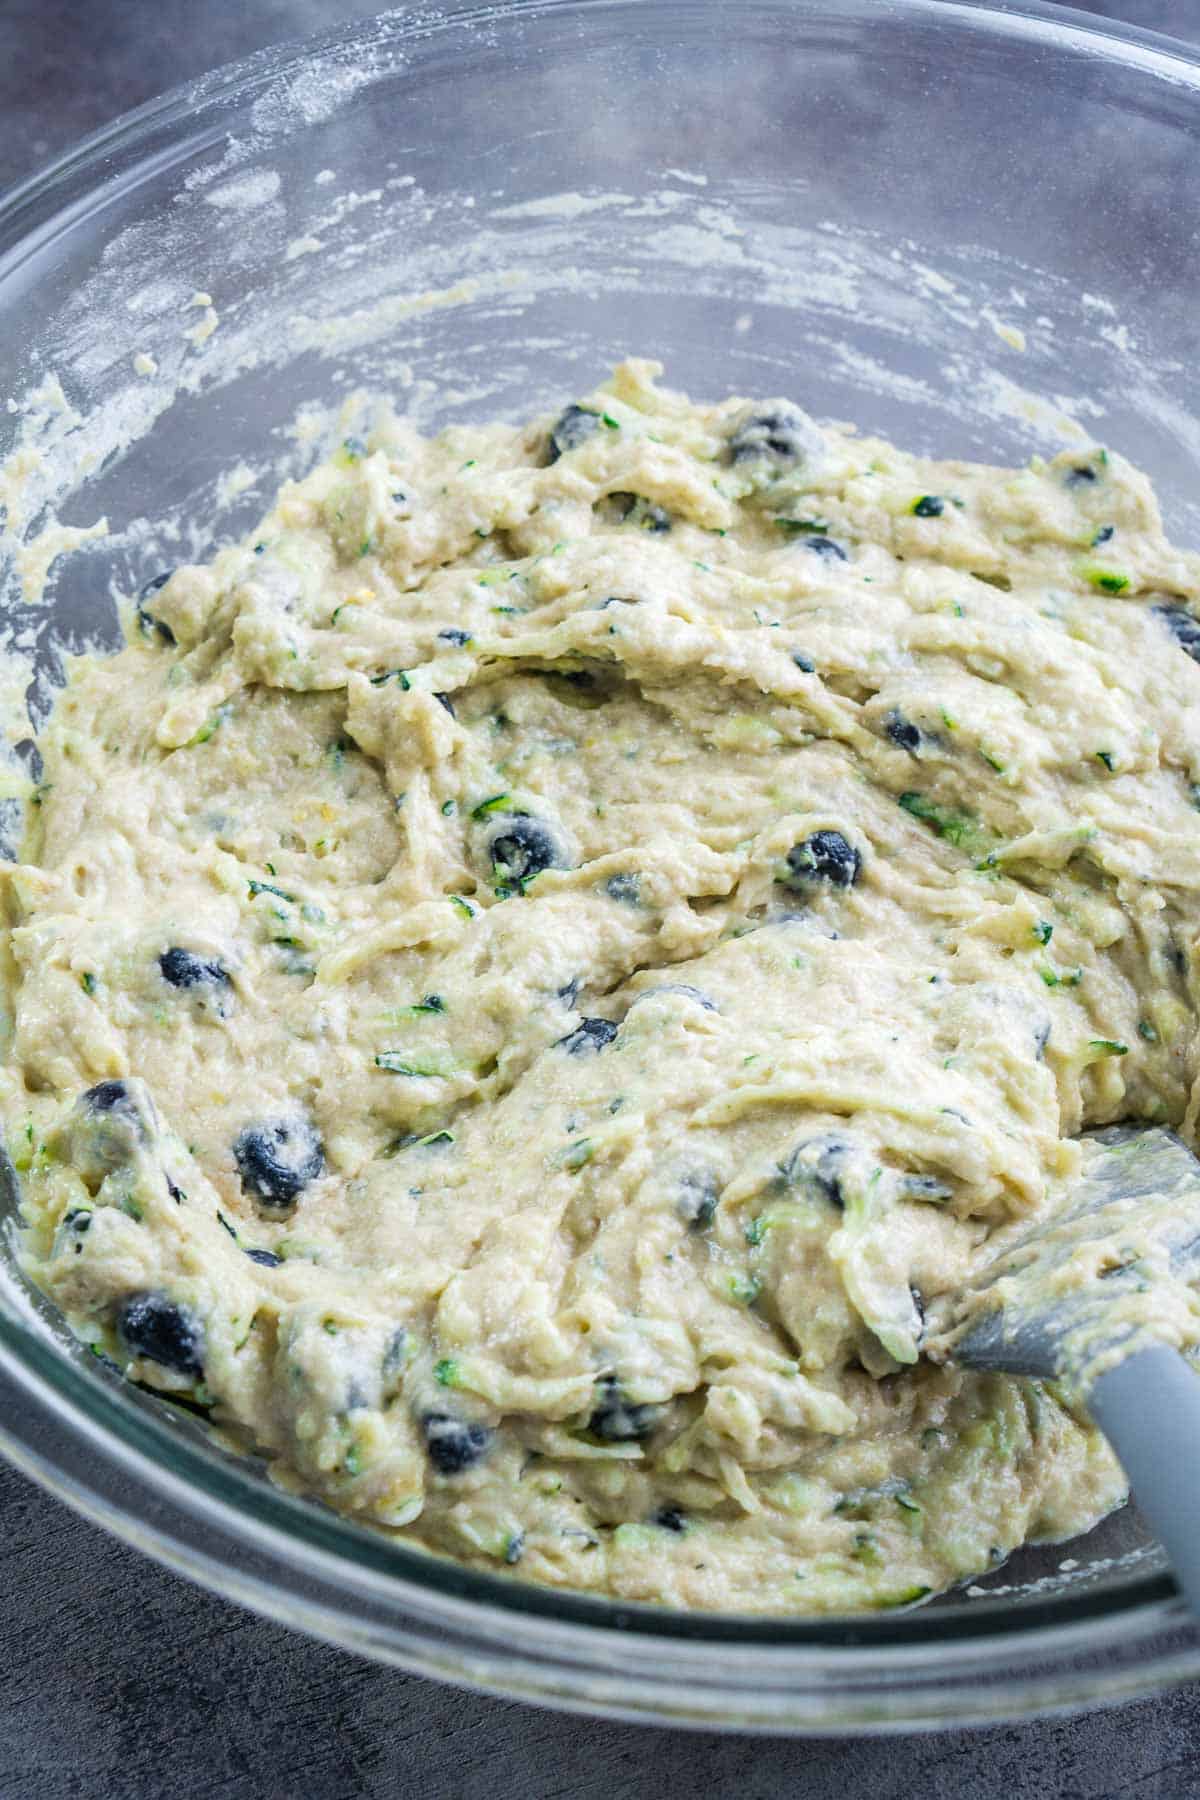 blueberries are stirred into blueberry zucchini bread batter